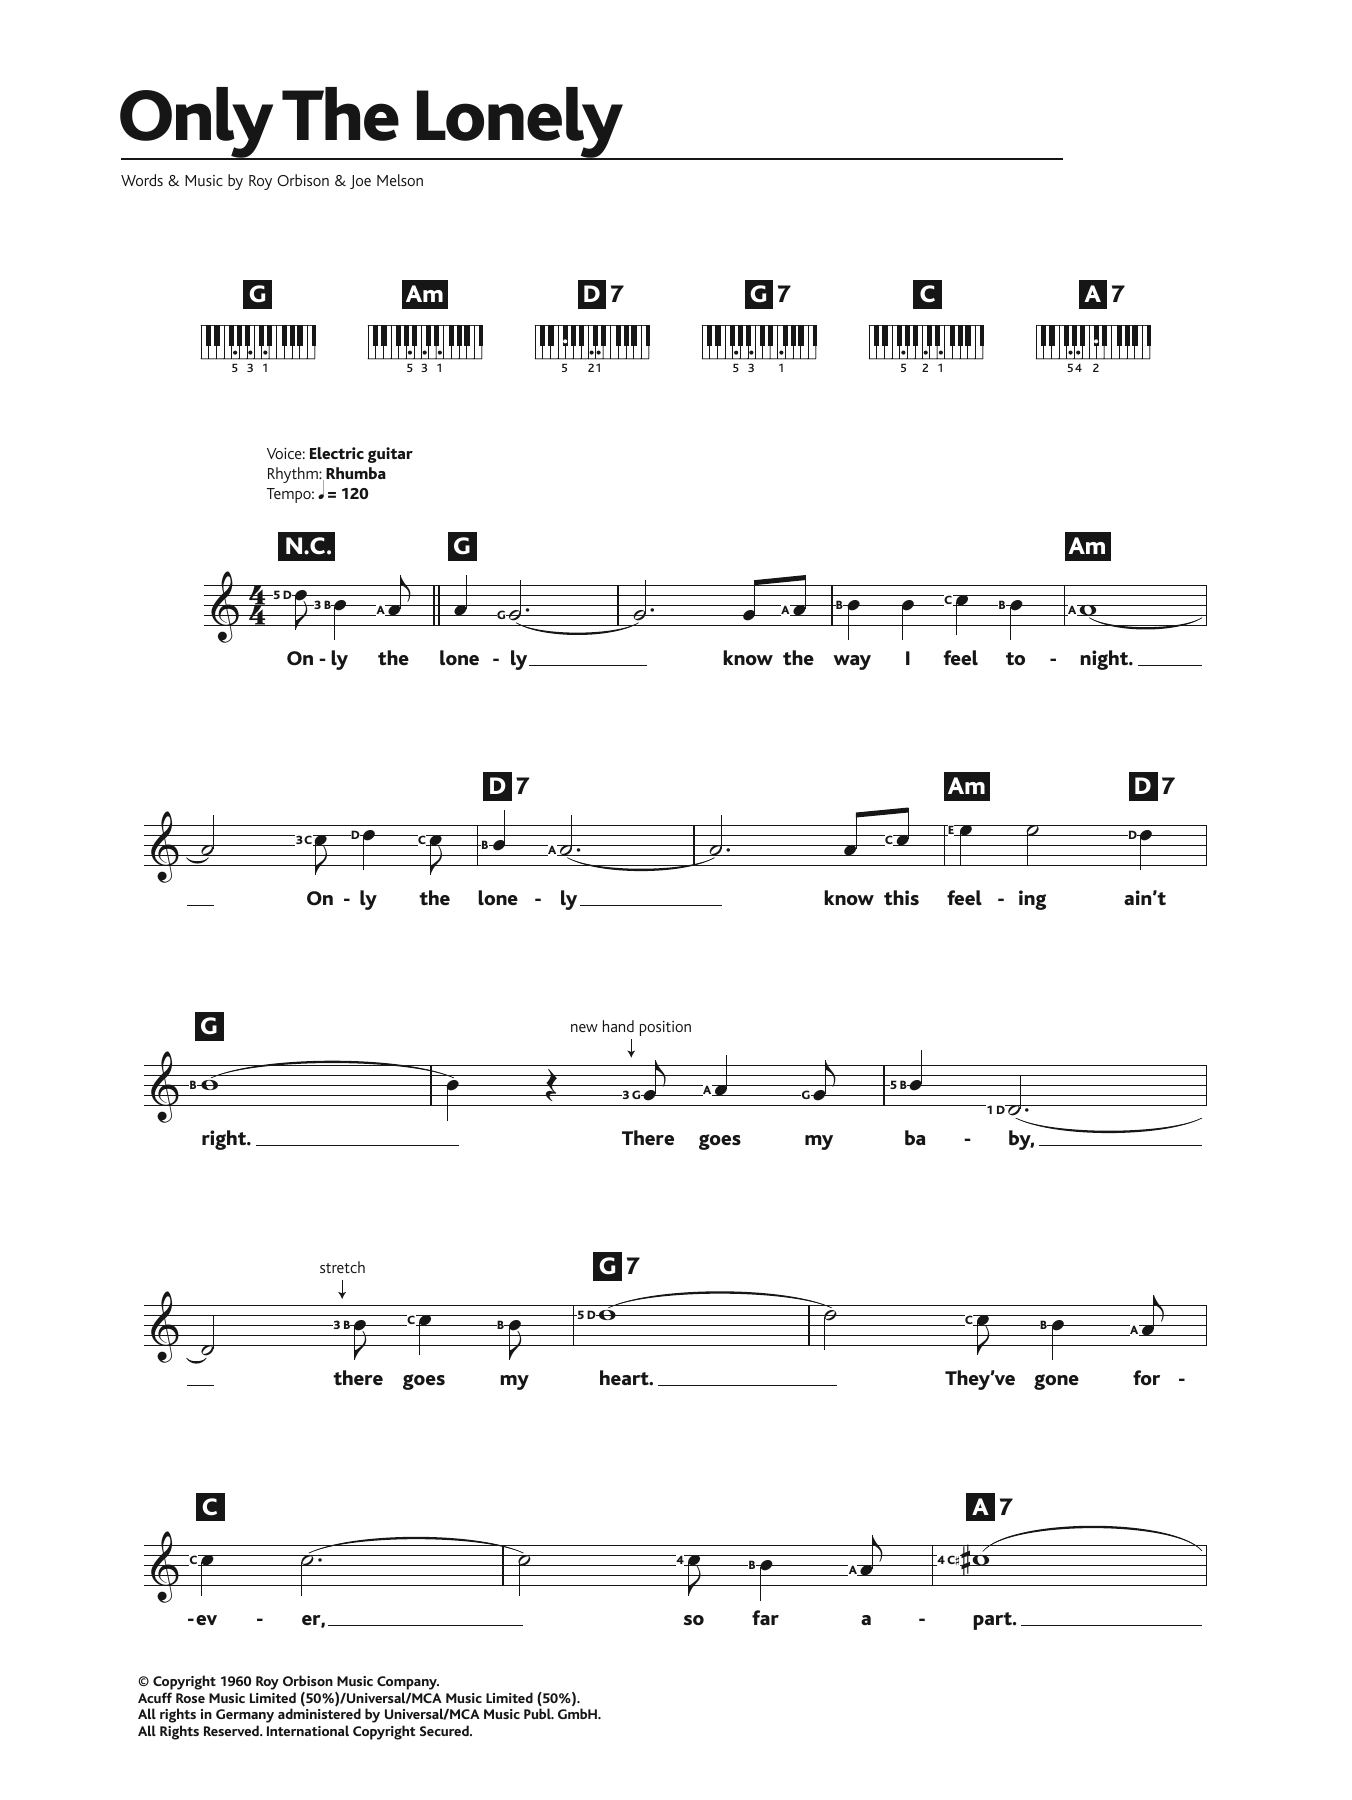 Roy Orbison Only The Lonely sheet music notes and chords. Download Printable PDF.